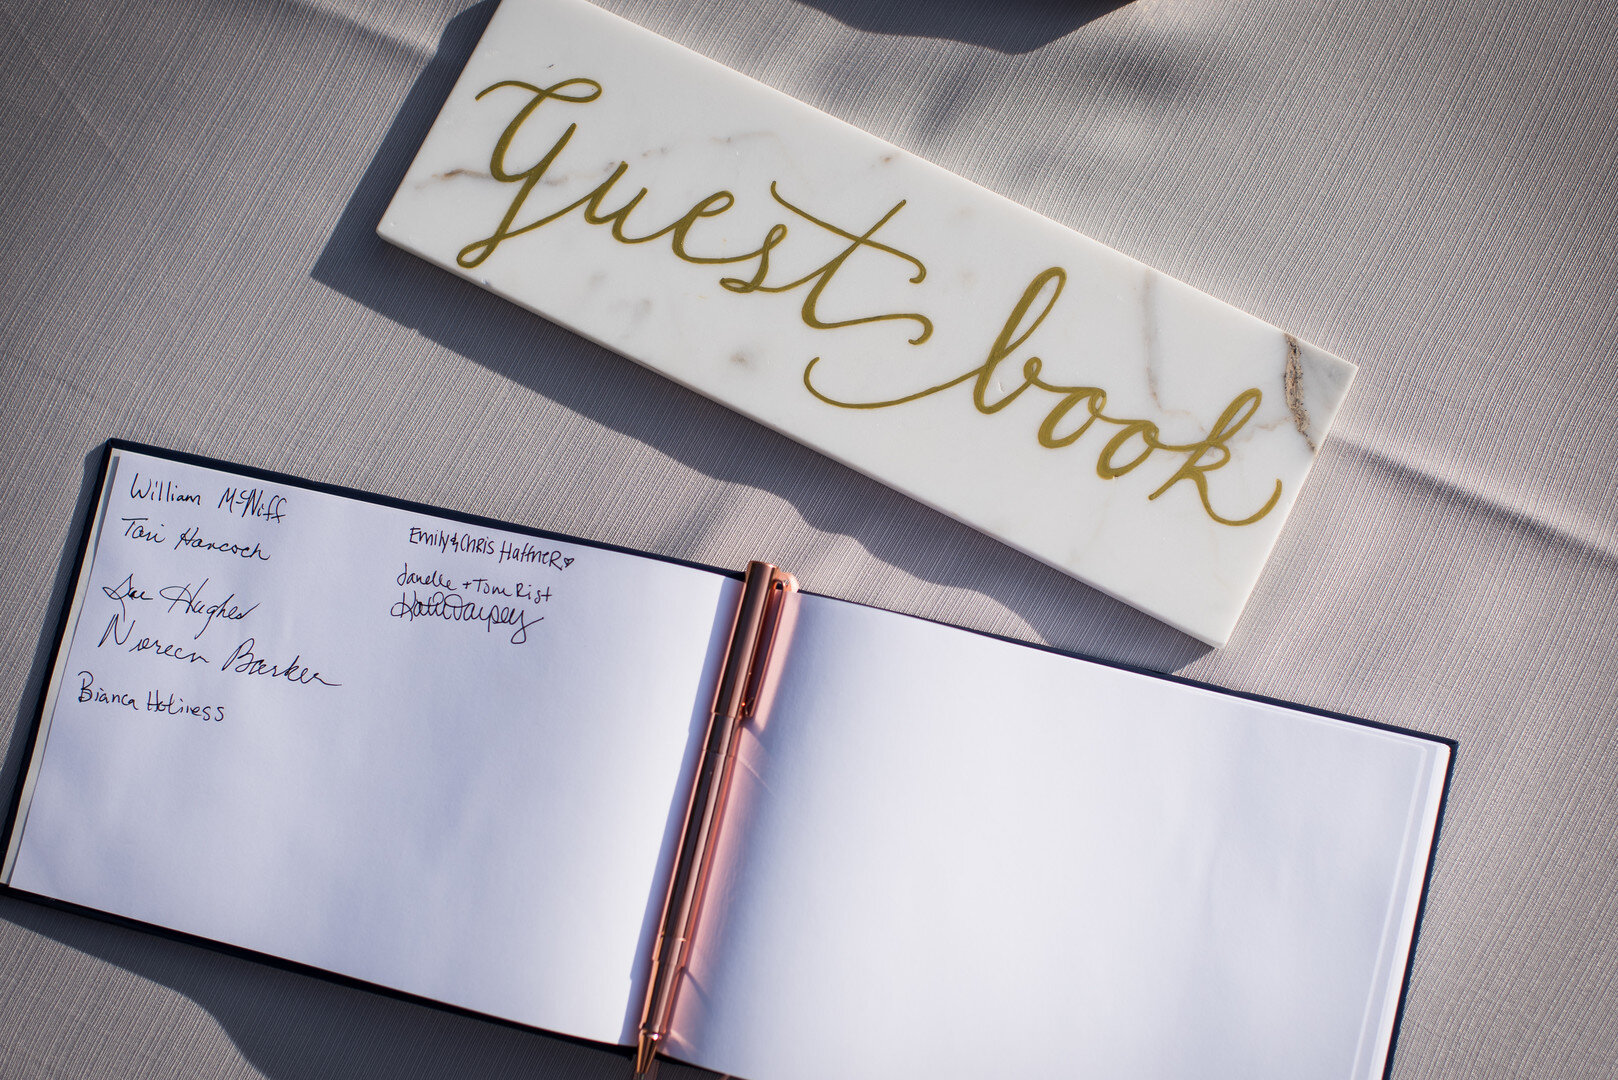 Wedding Guestbook Sign: Golden Hour Armour House Chicago Wedding captured by Inspired Eye Photography featured on CHI thee WED. Find more wedding ideas at CHItheeWED.com!